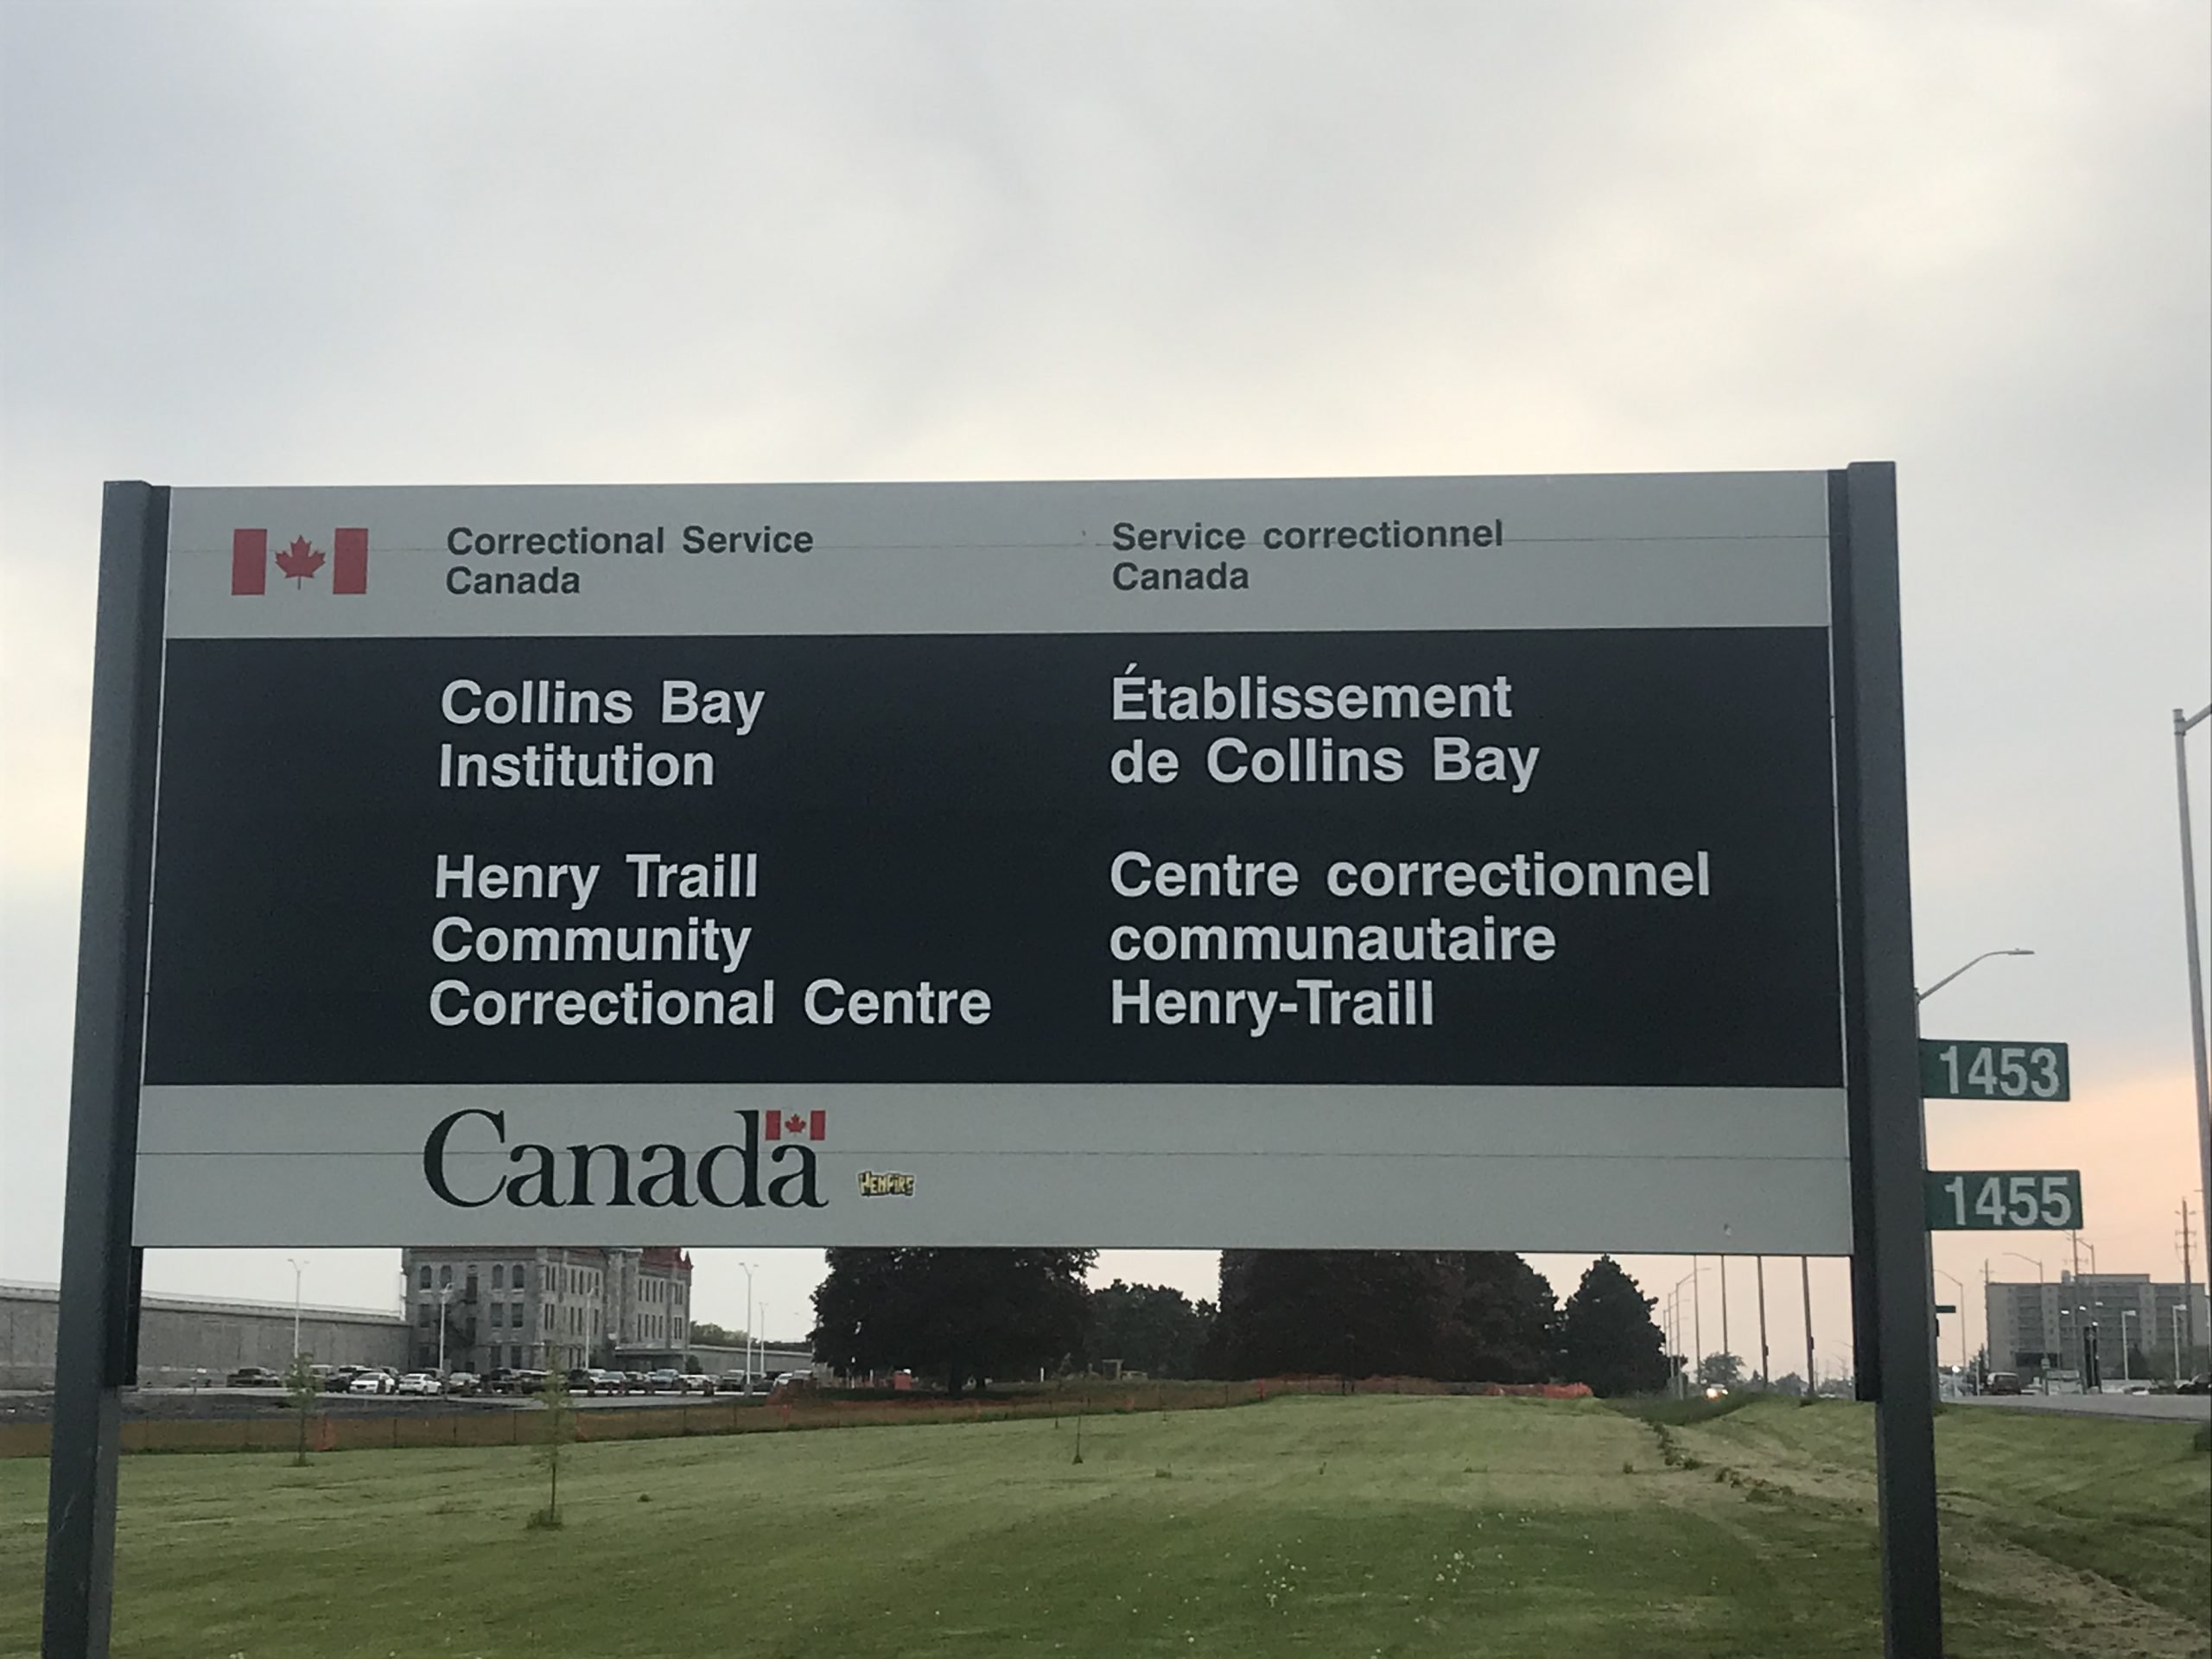 Cannabis, hash, suspected psilocybin among items seized at Collins Bay Institution